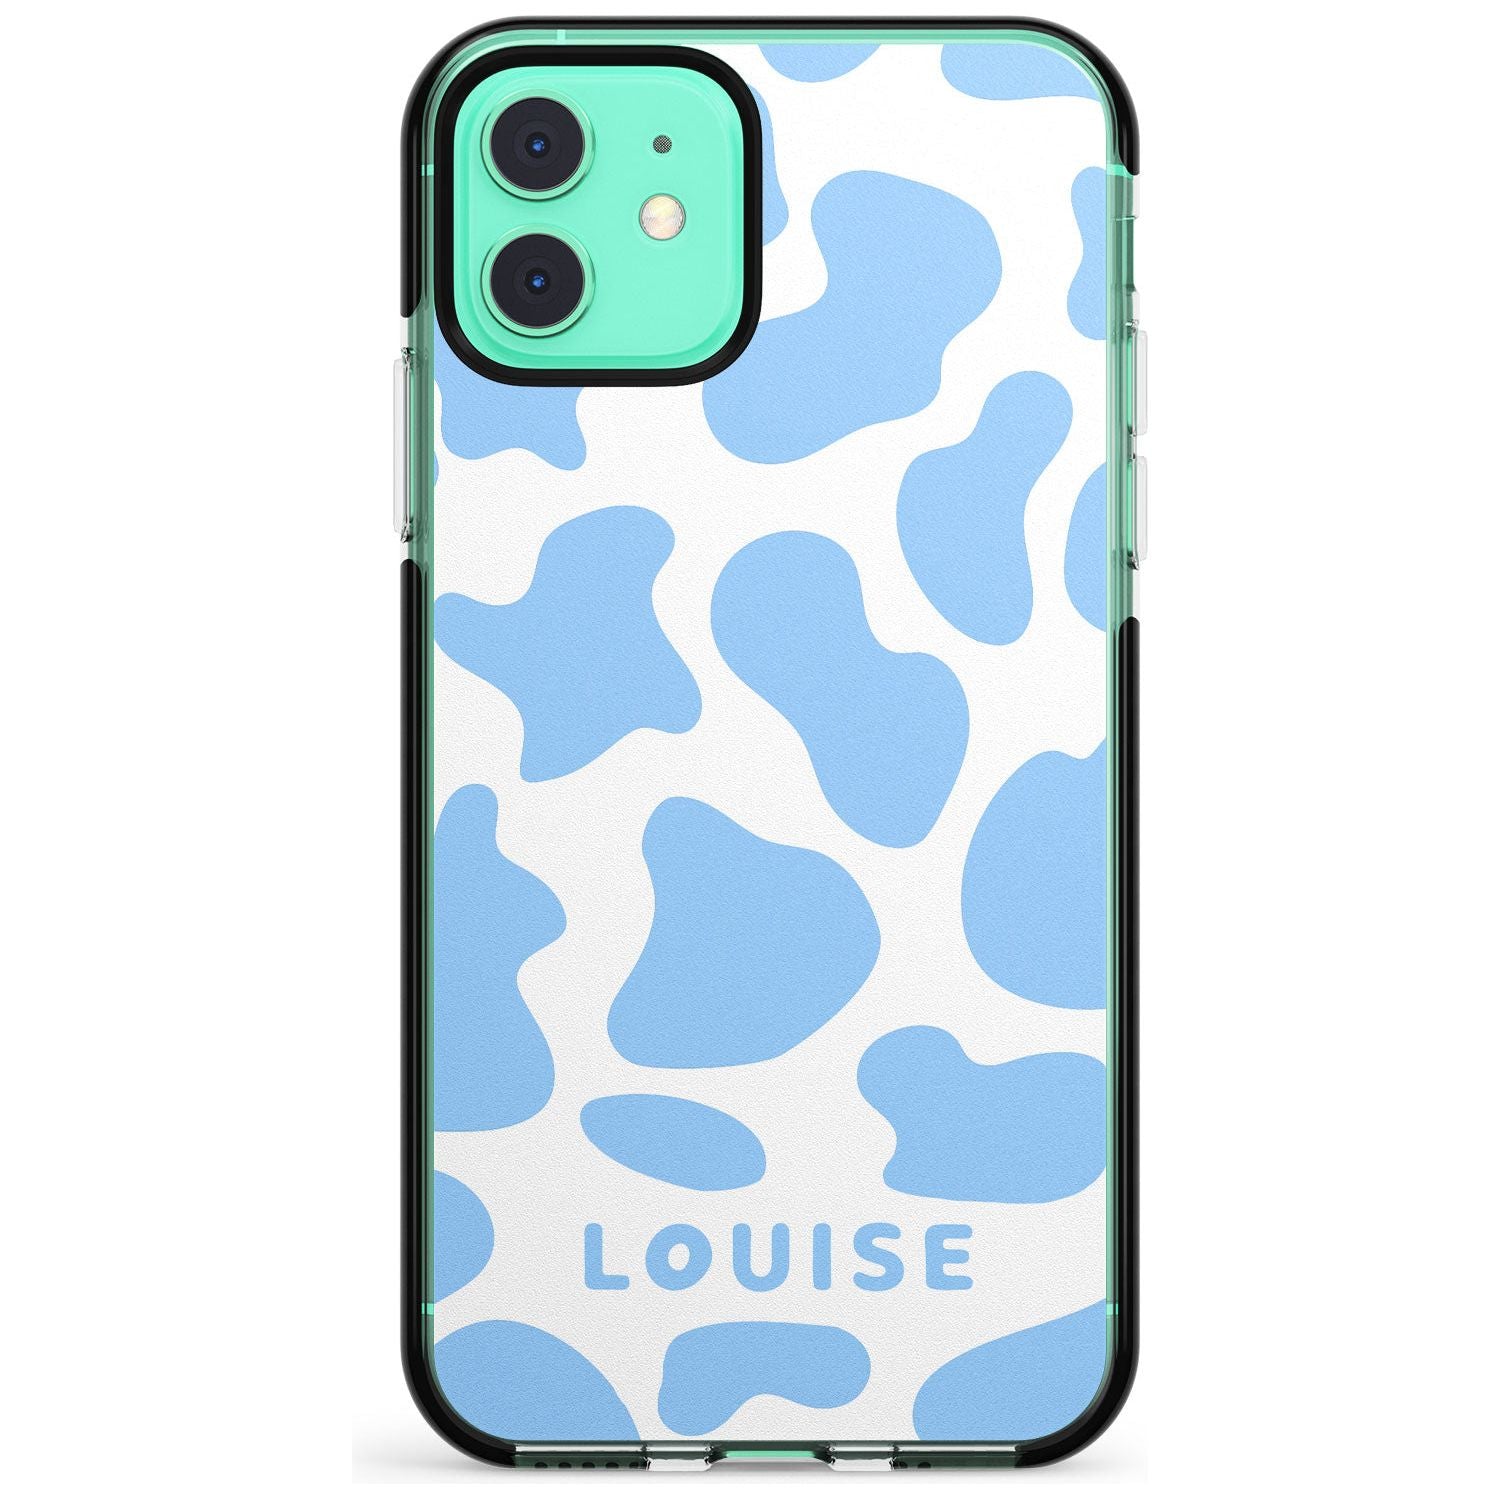 Personalised Blue and White Cow Print Black Impact Phone Case for iPhone 11 Pro Max